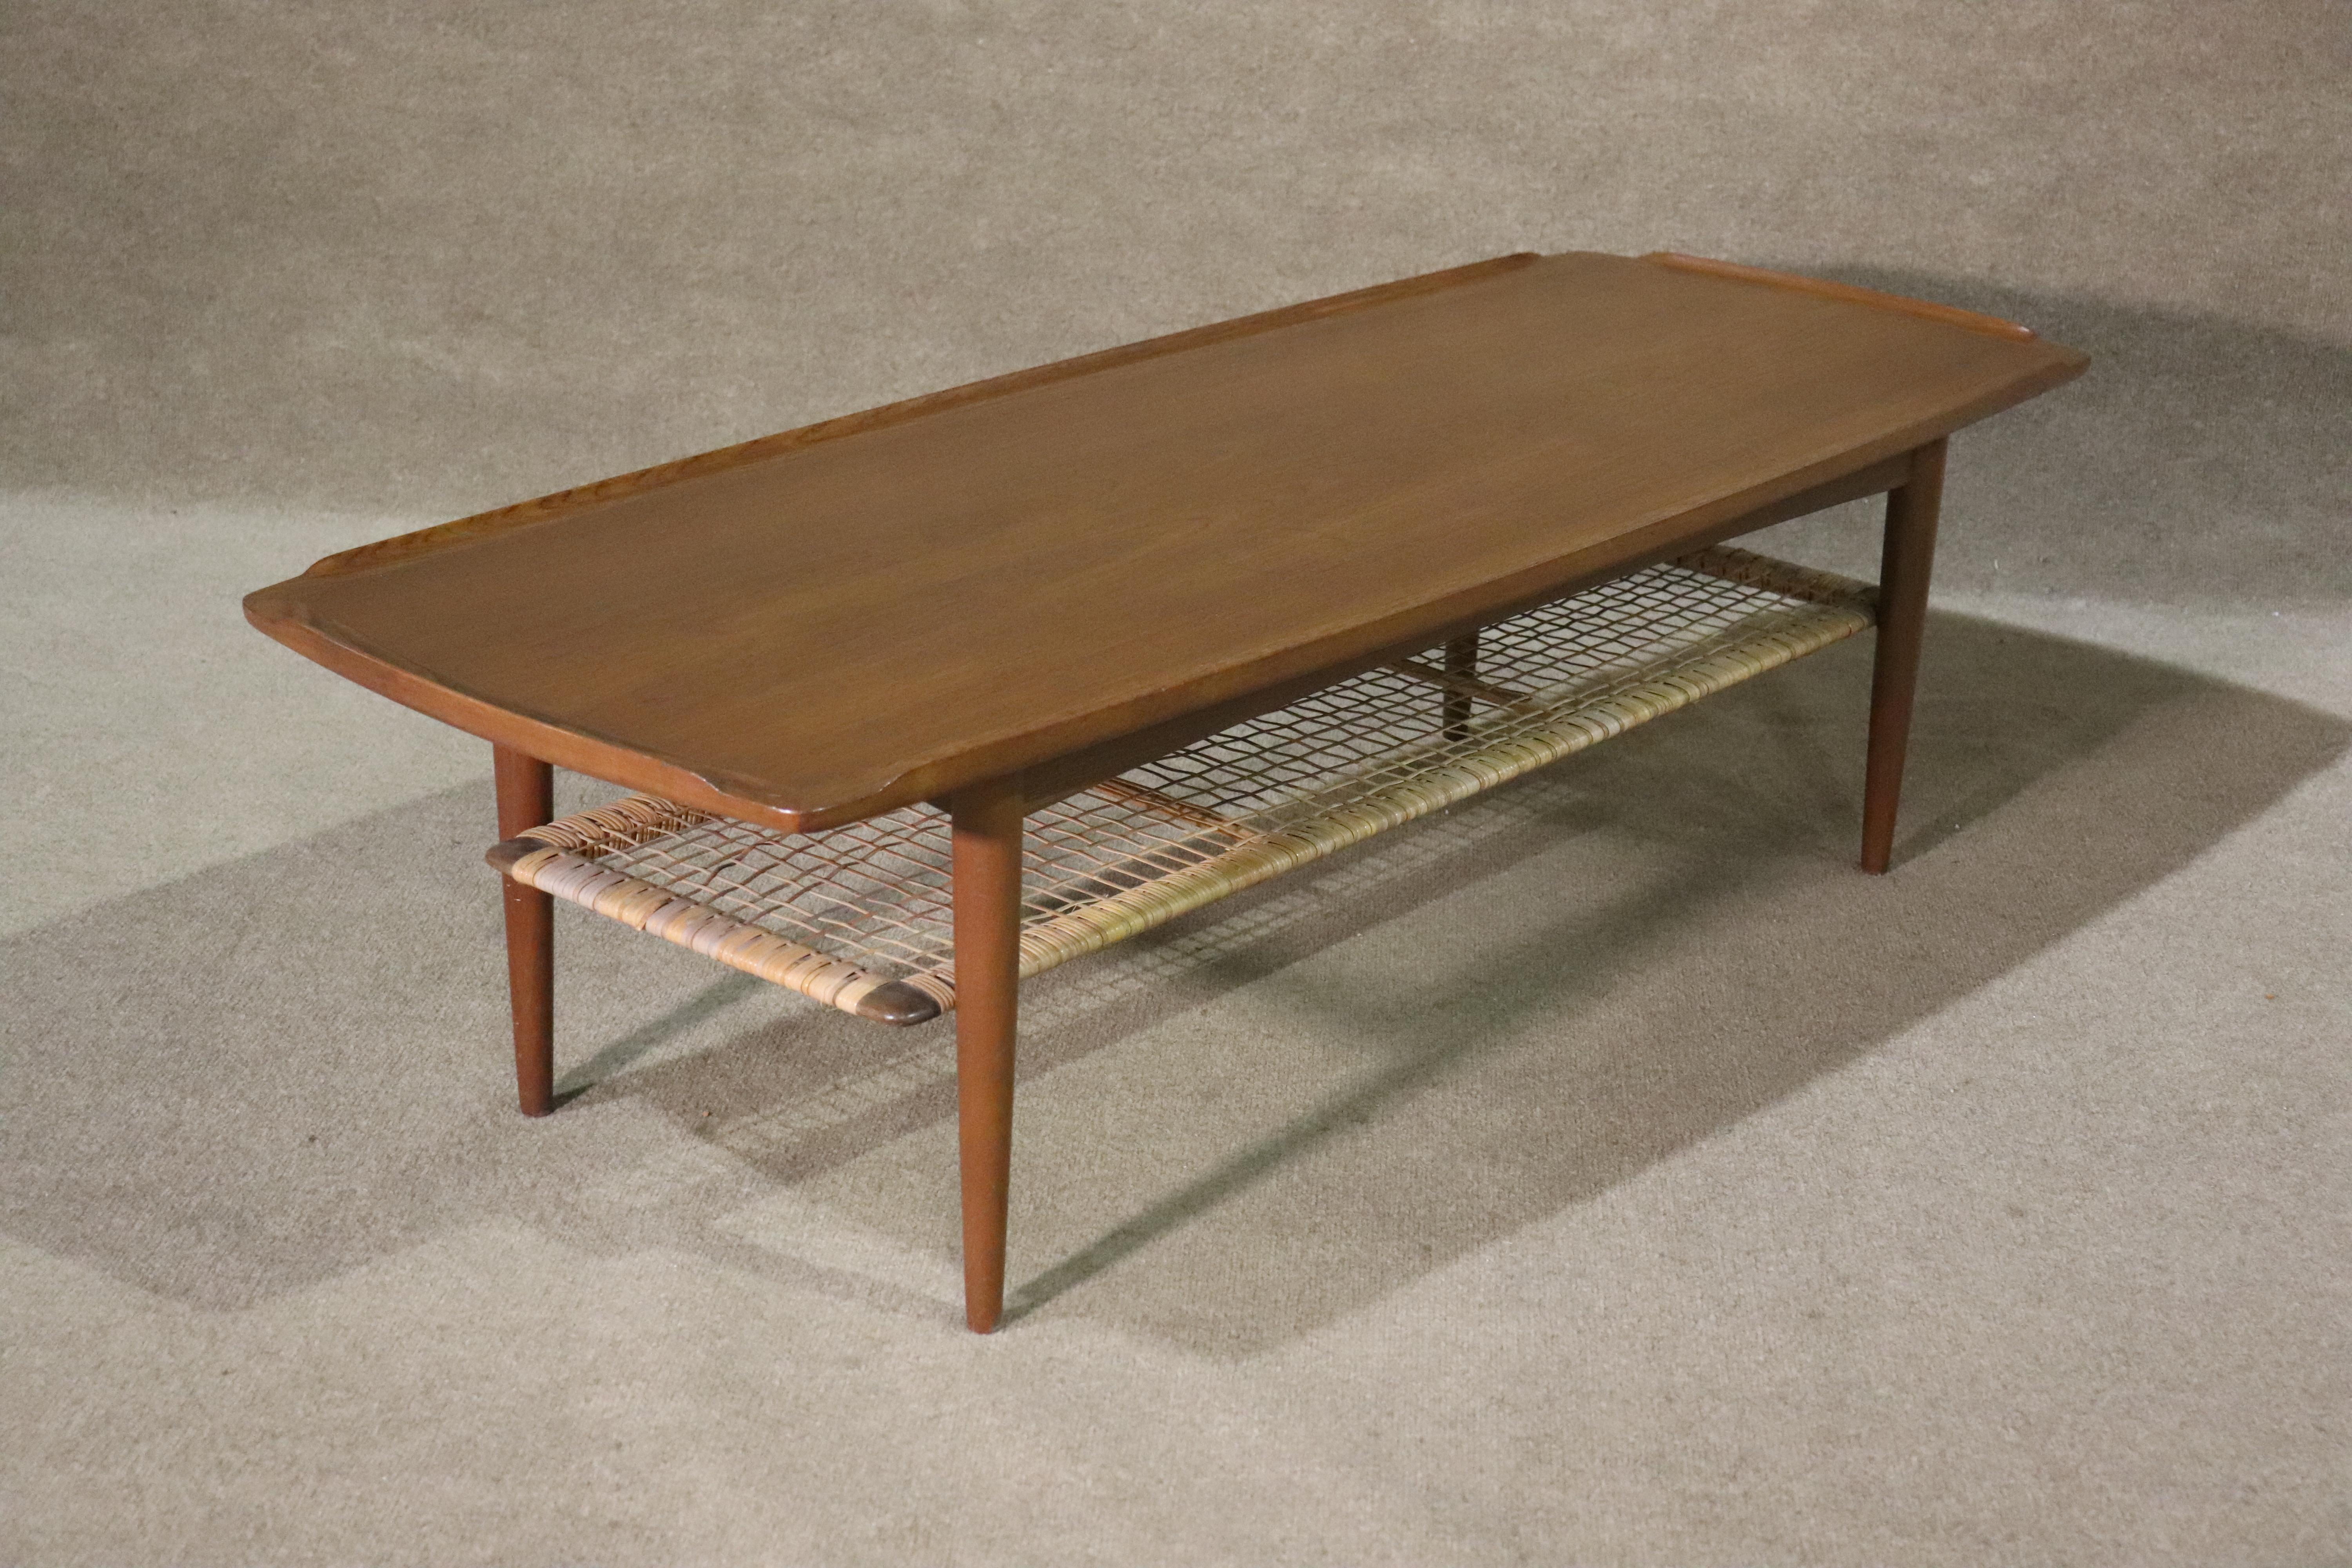 Danish coffee table designed by Poul Jensen for Selig. Great mid-century design with turned edges and woven shelf.
Please confirm location NY or NJ